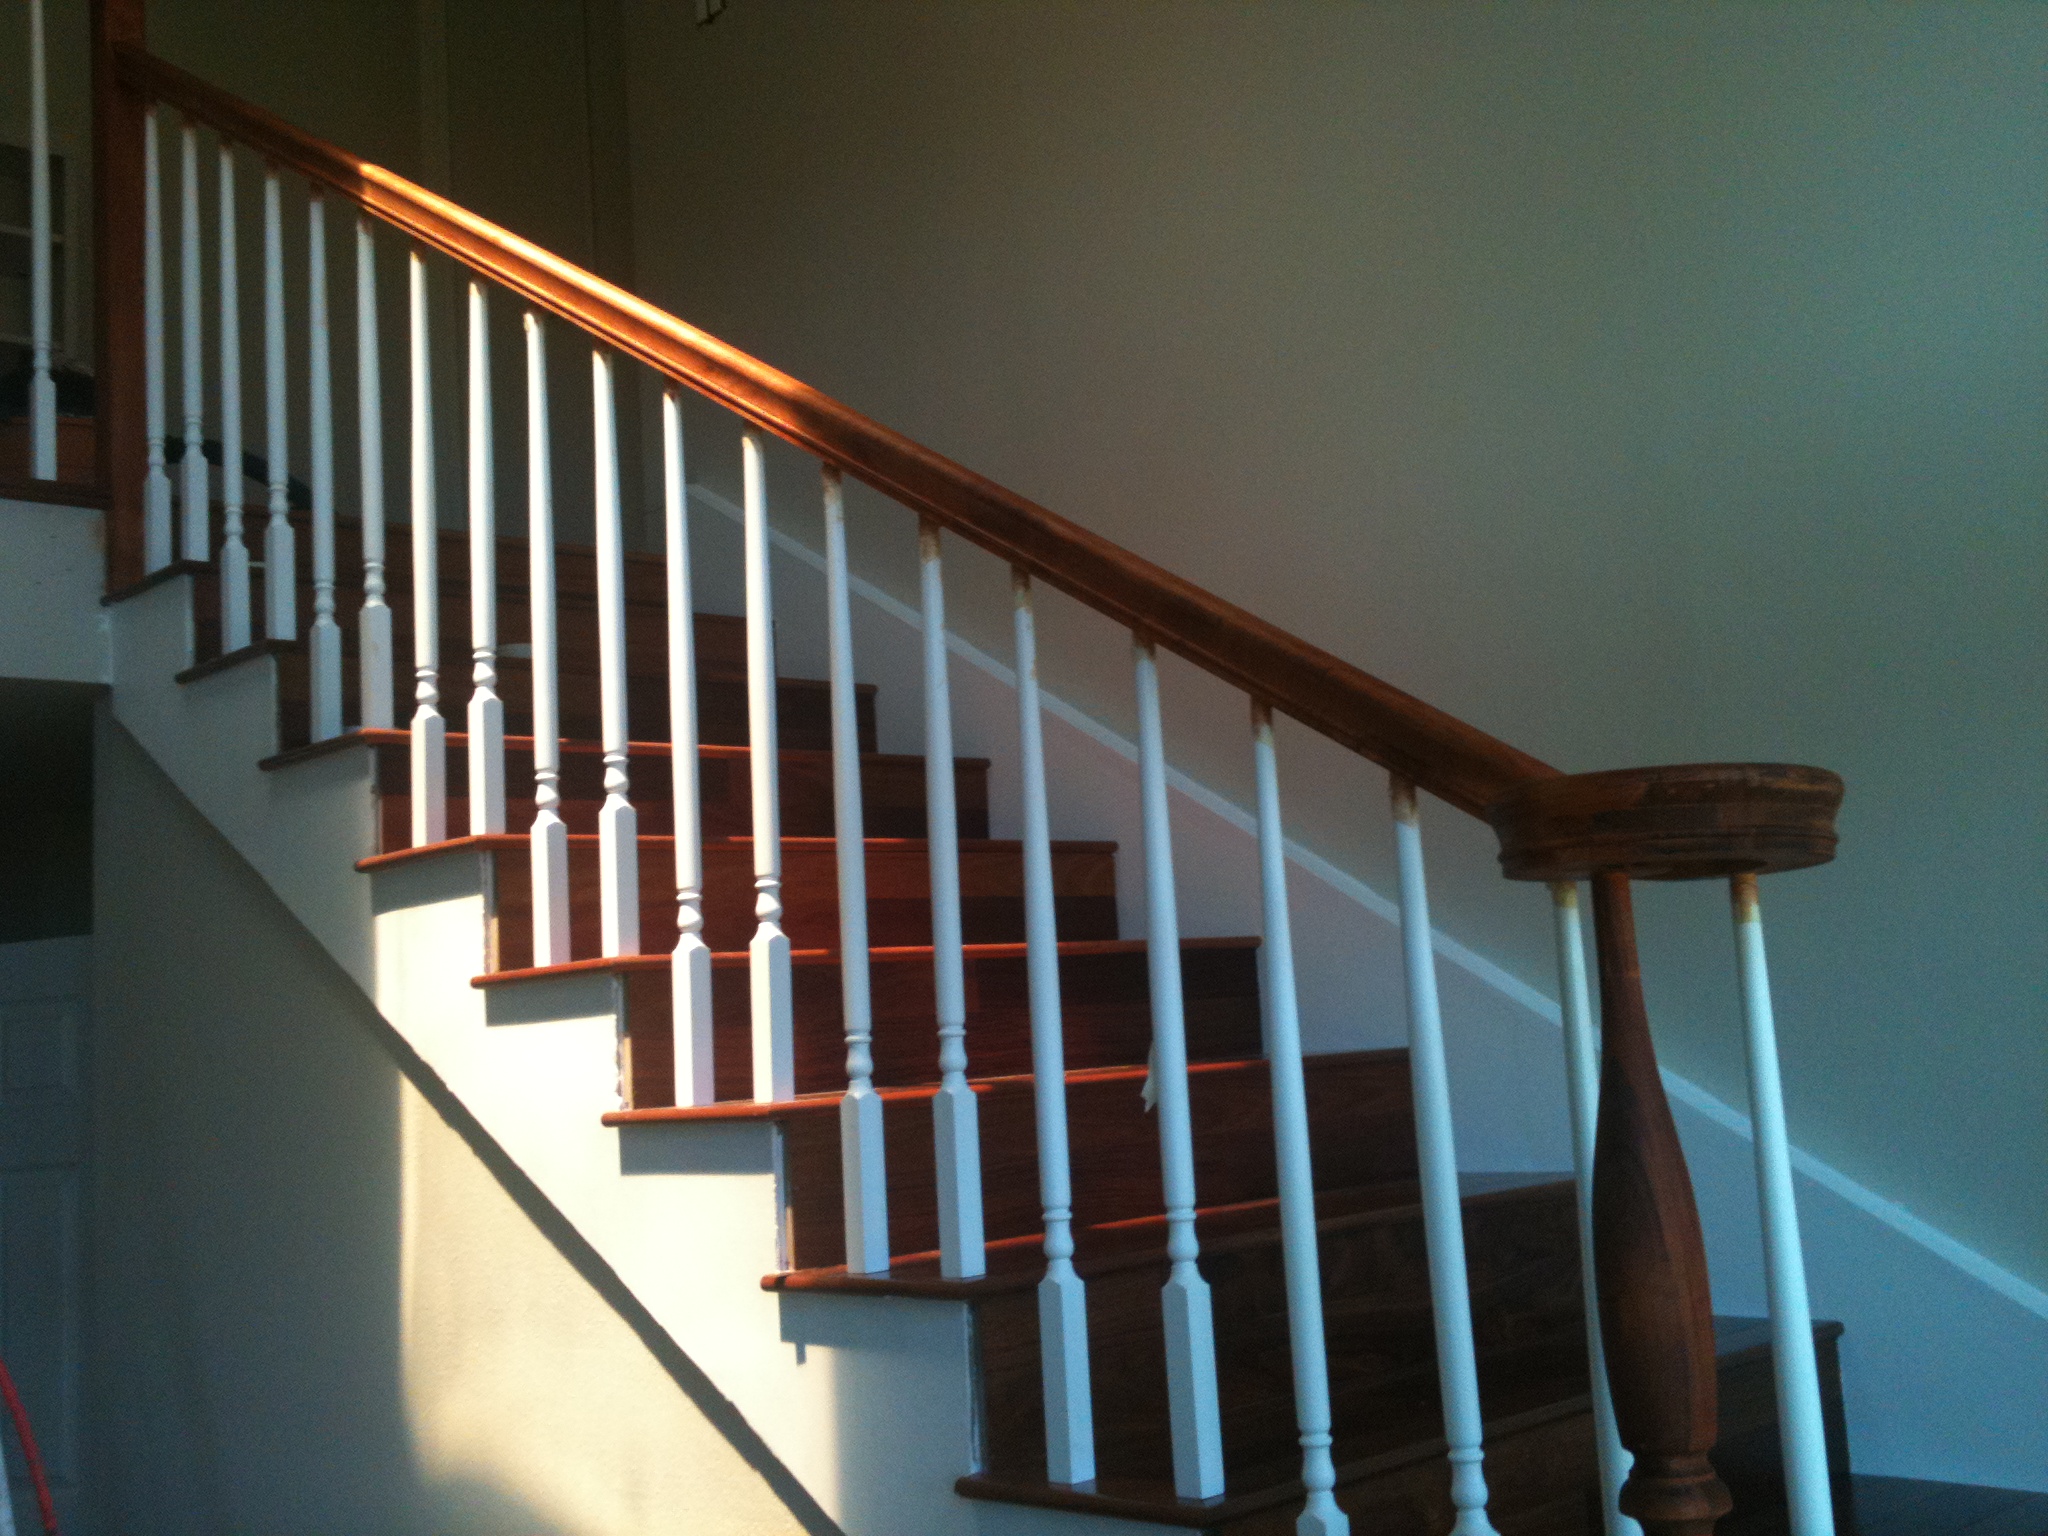 New stairs and railing